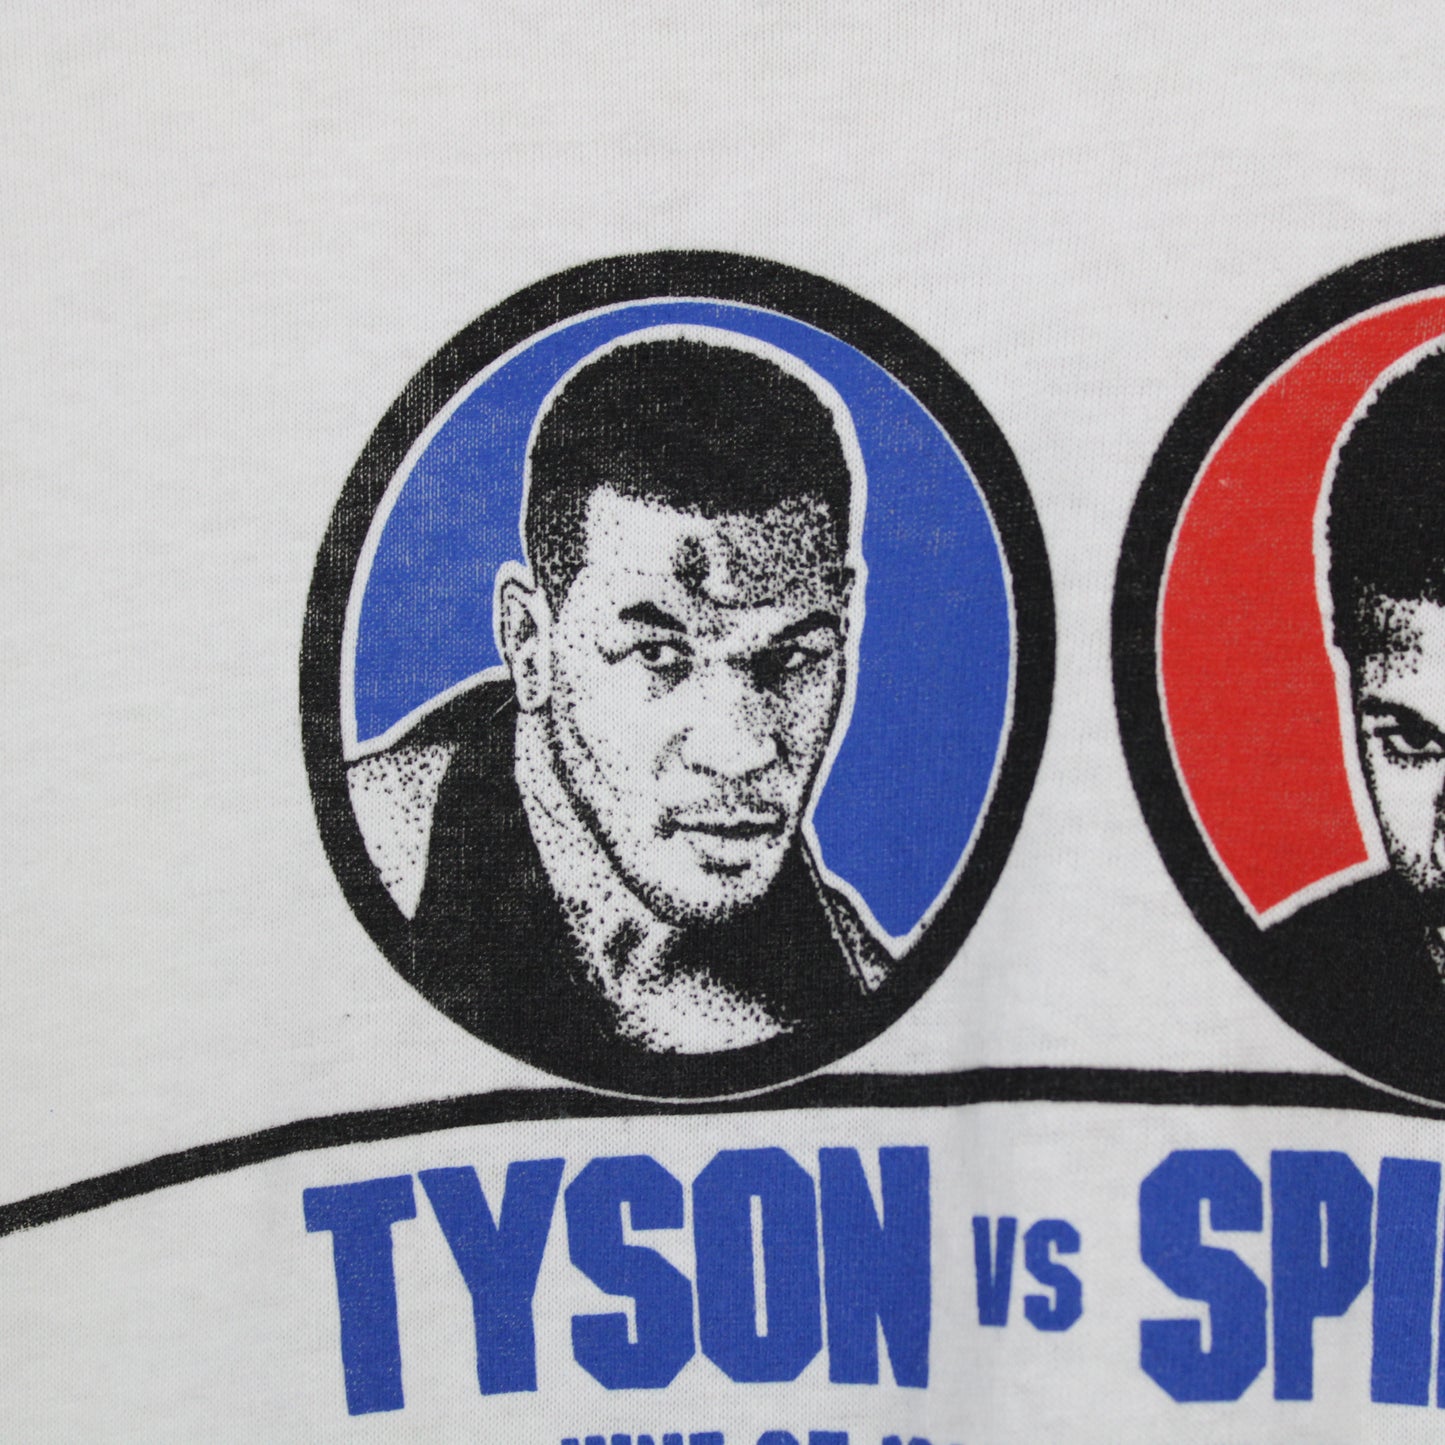 Vintage 1988 Tyson vs Spinks Boxing Tee - L